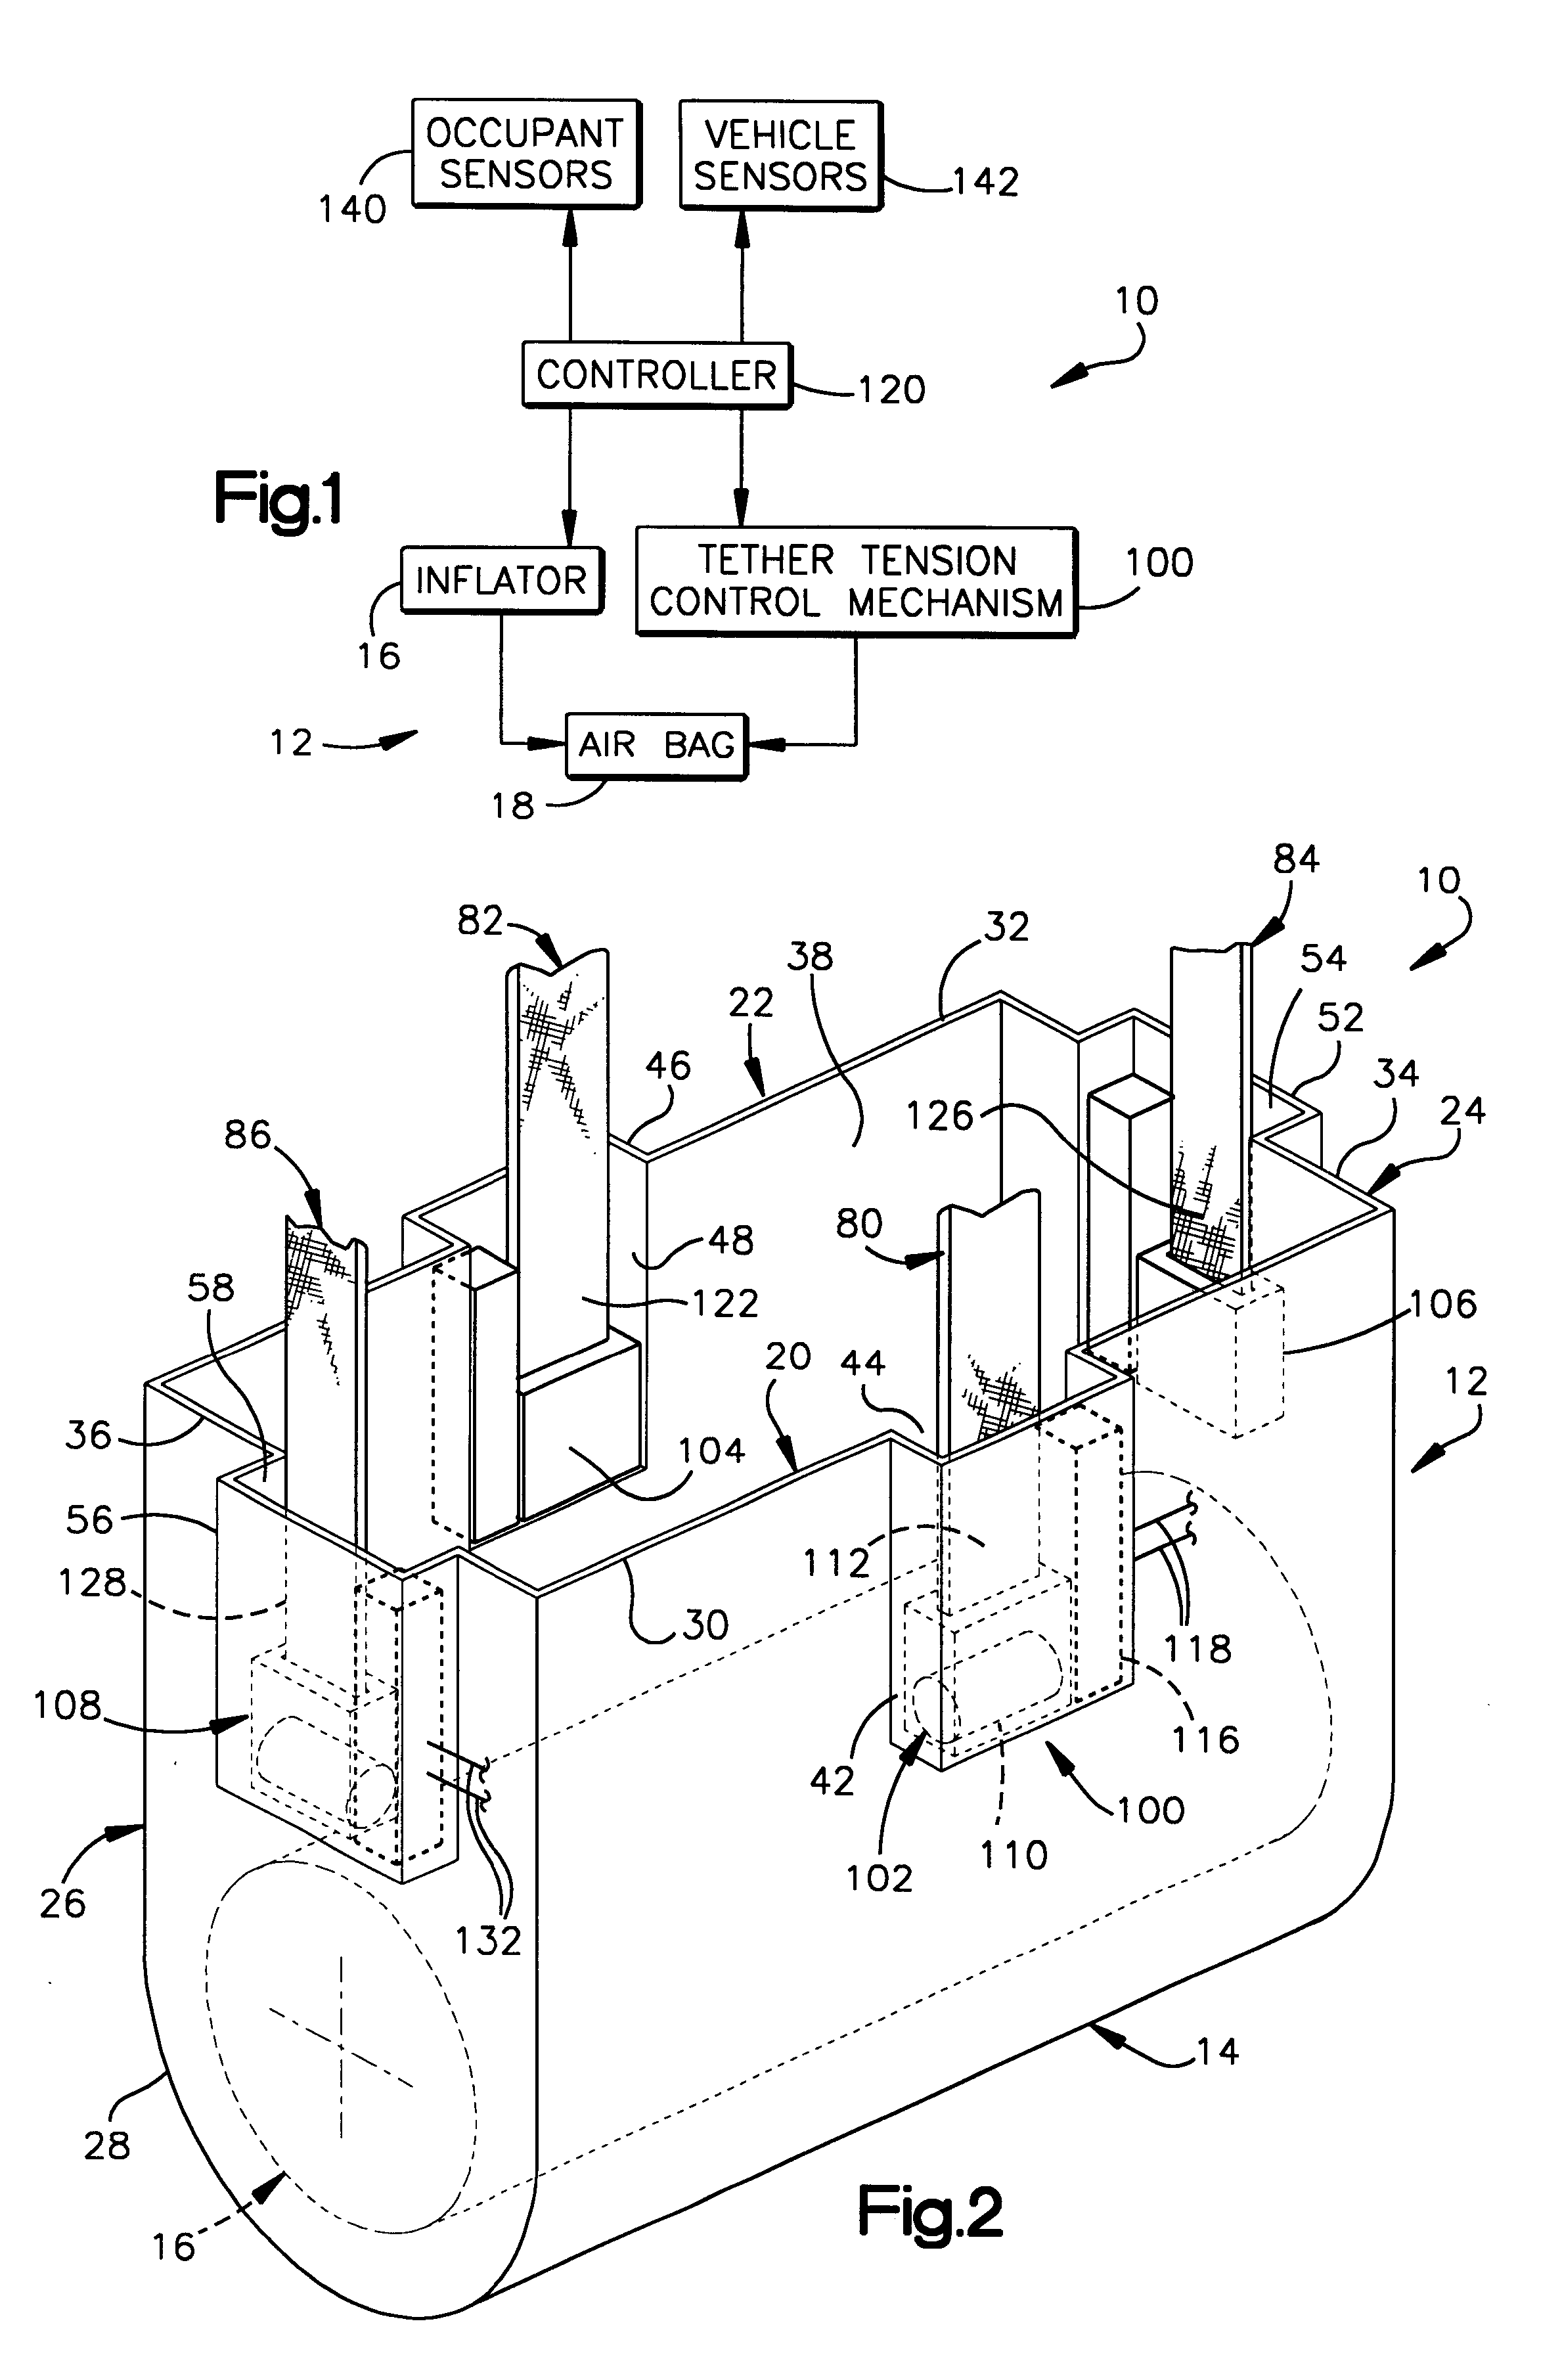 Apparatus for positioning an inflated air bag